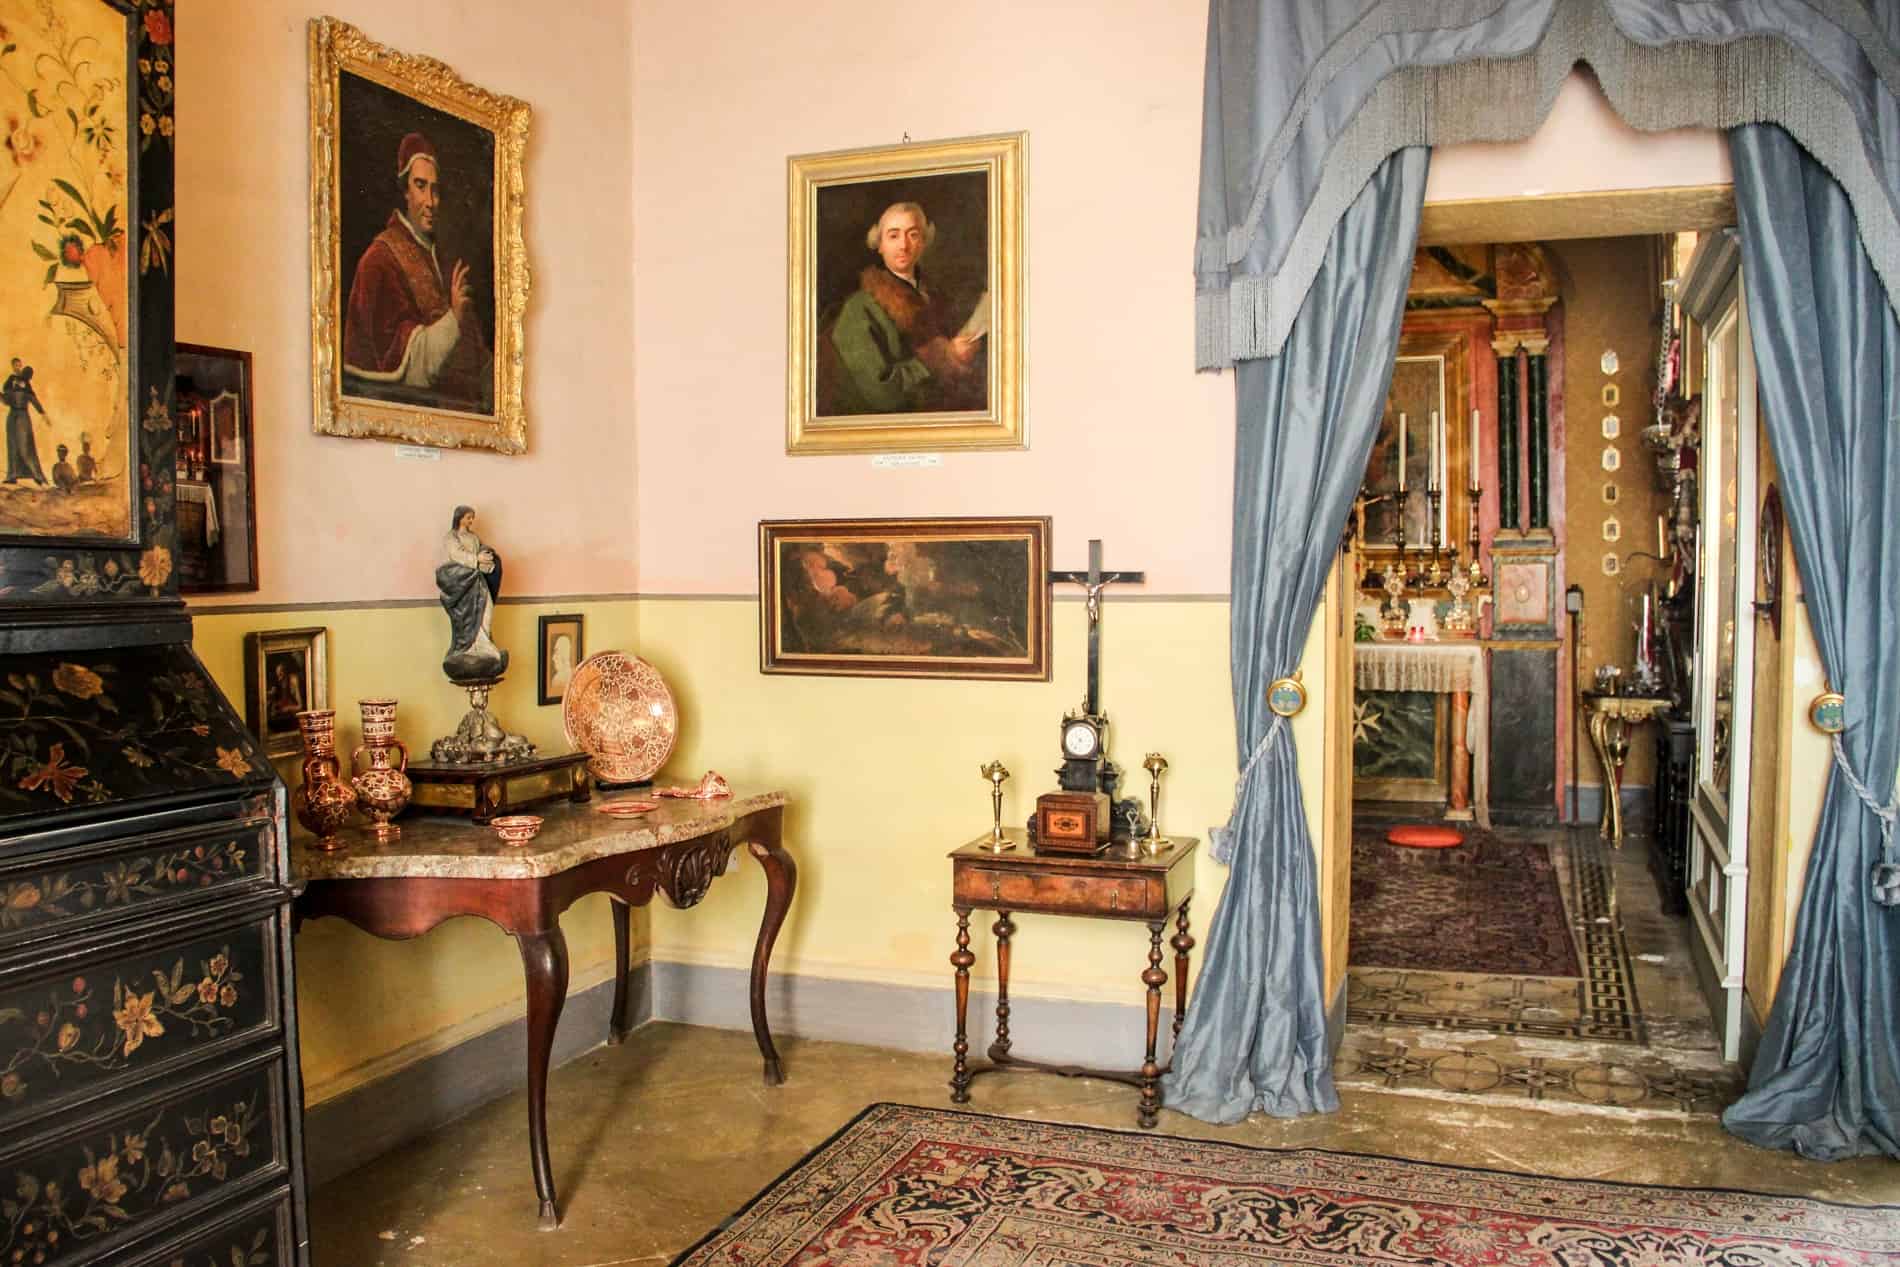 Opulent wooden furnishing, oil paintings and light blue door drapes in the noble house of Casa Rocca Piccola in Malta.